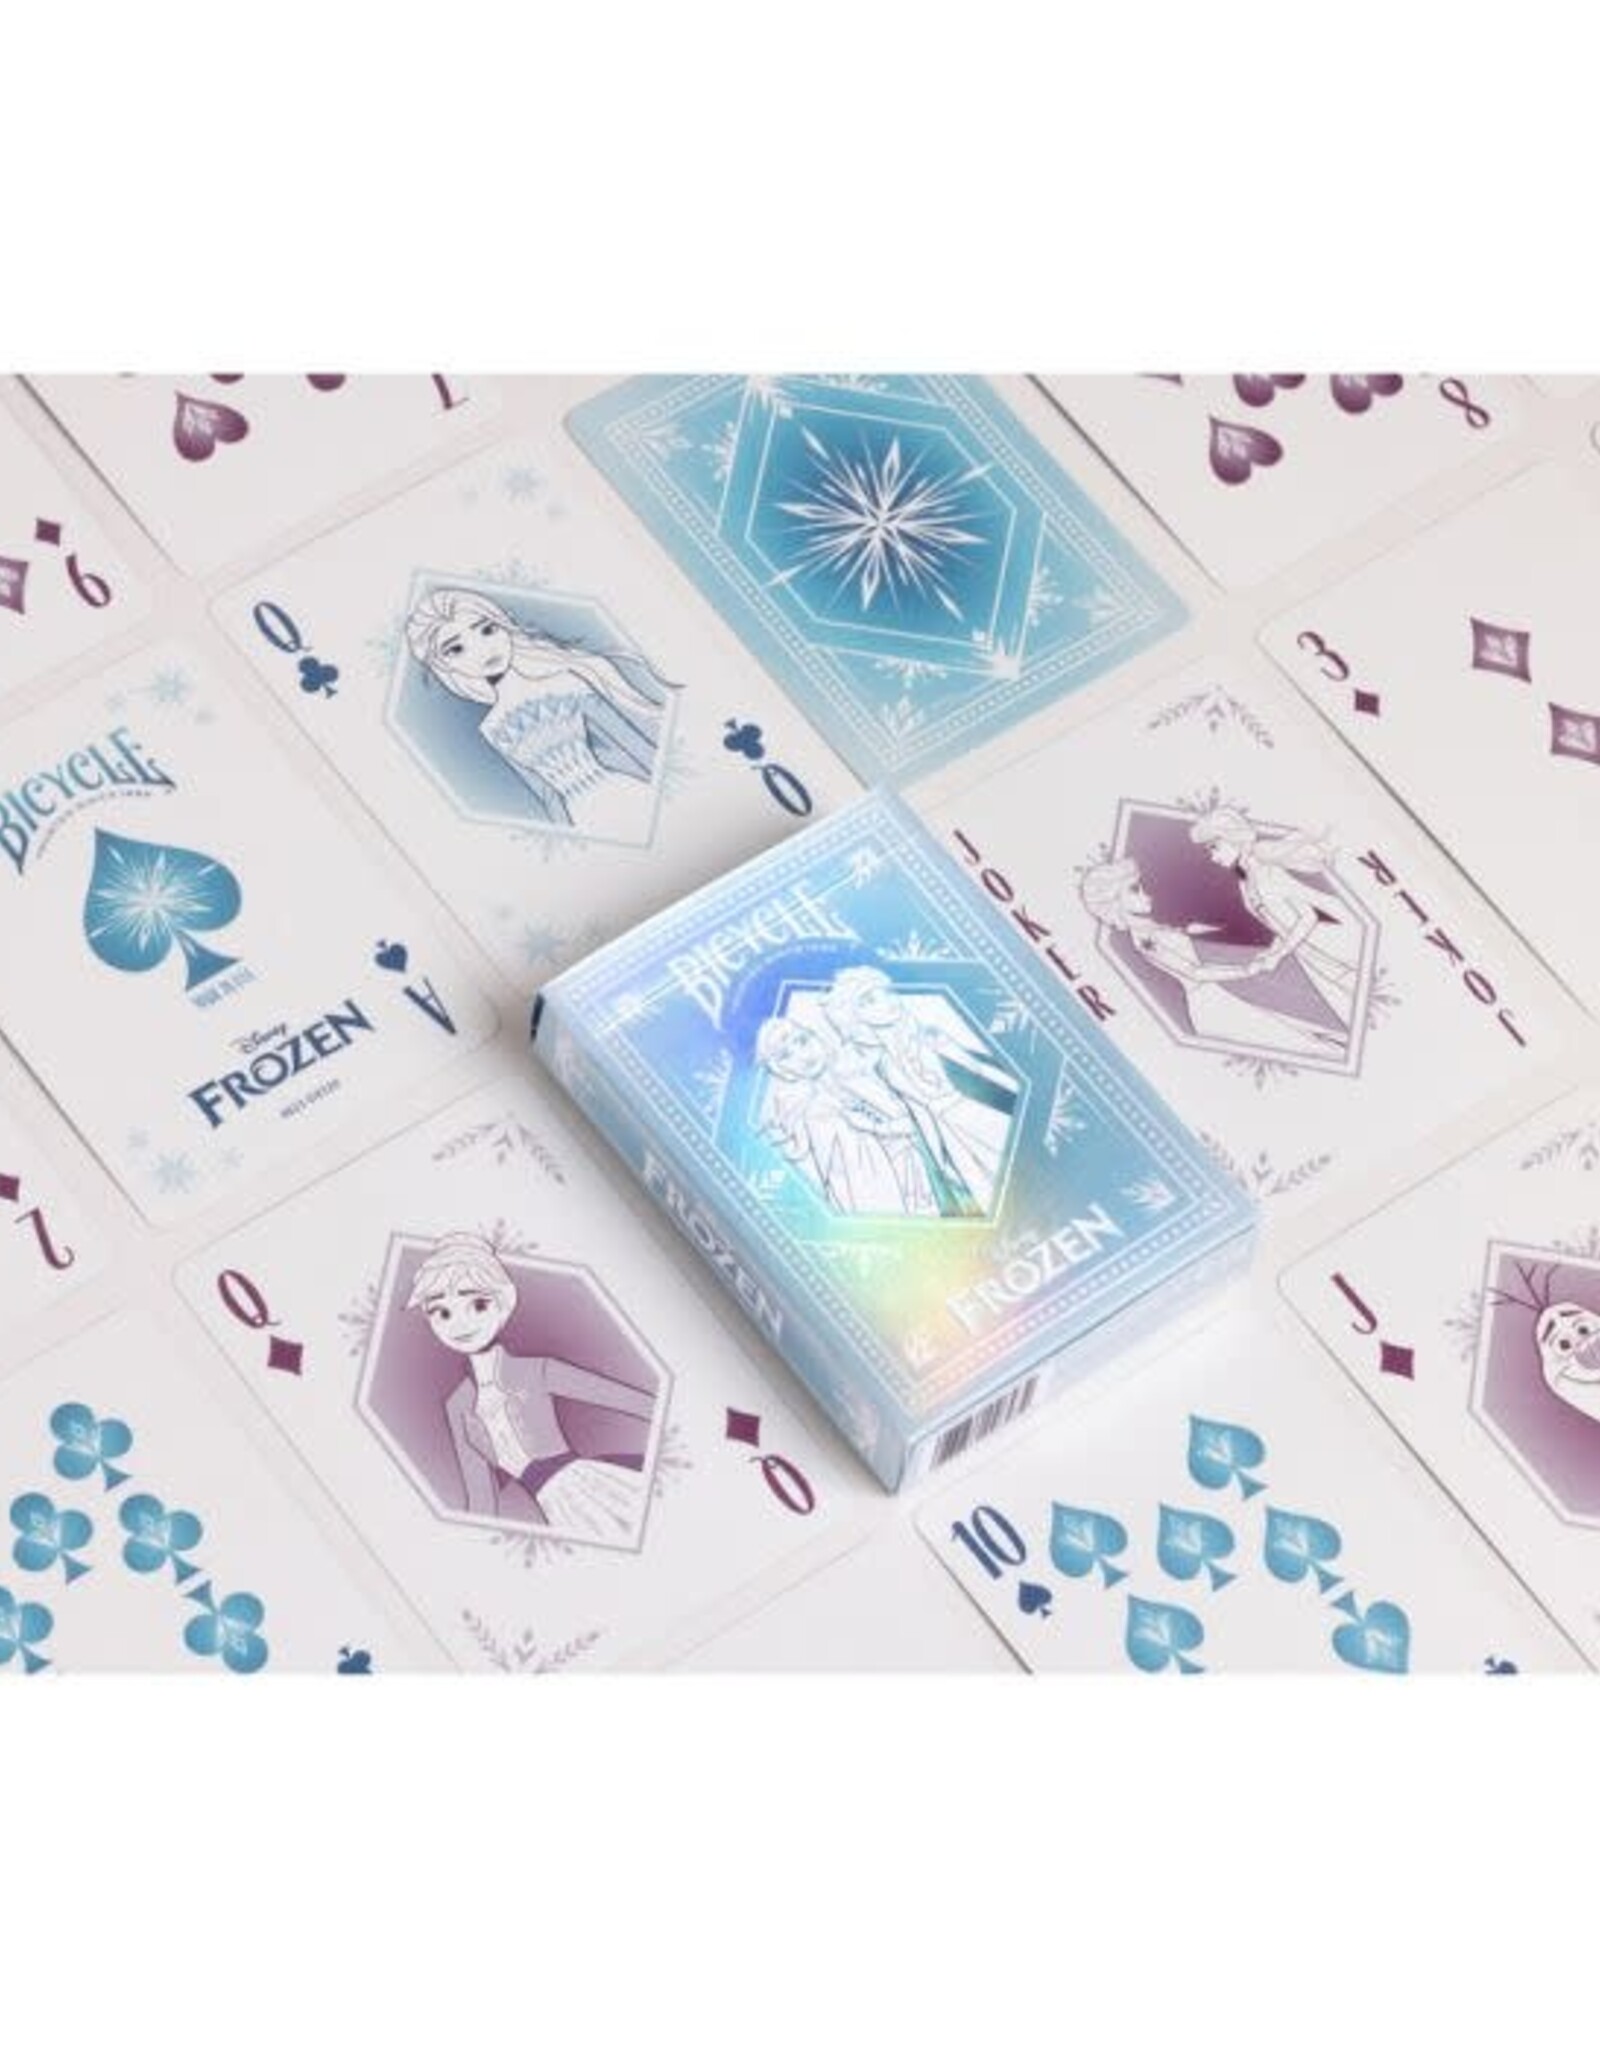 United States Playing Card Co (April 15, 2024) Playing Cards: Bicycle Disney Frozen Blue